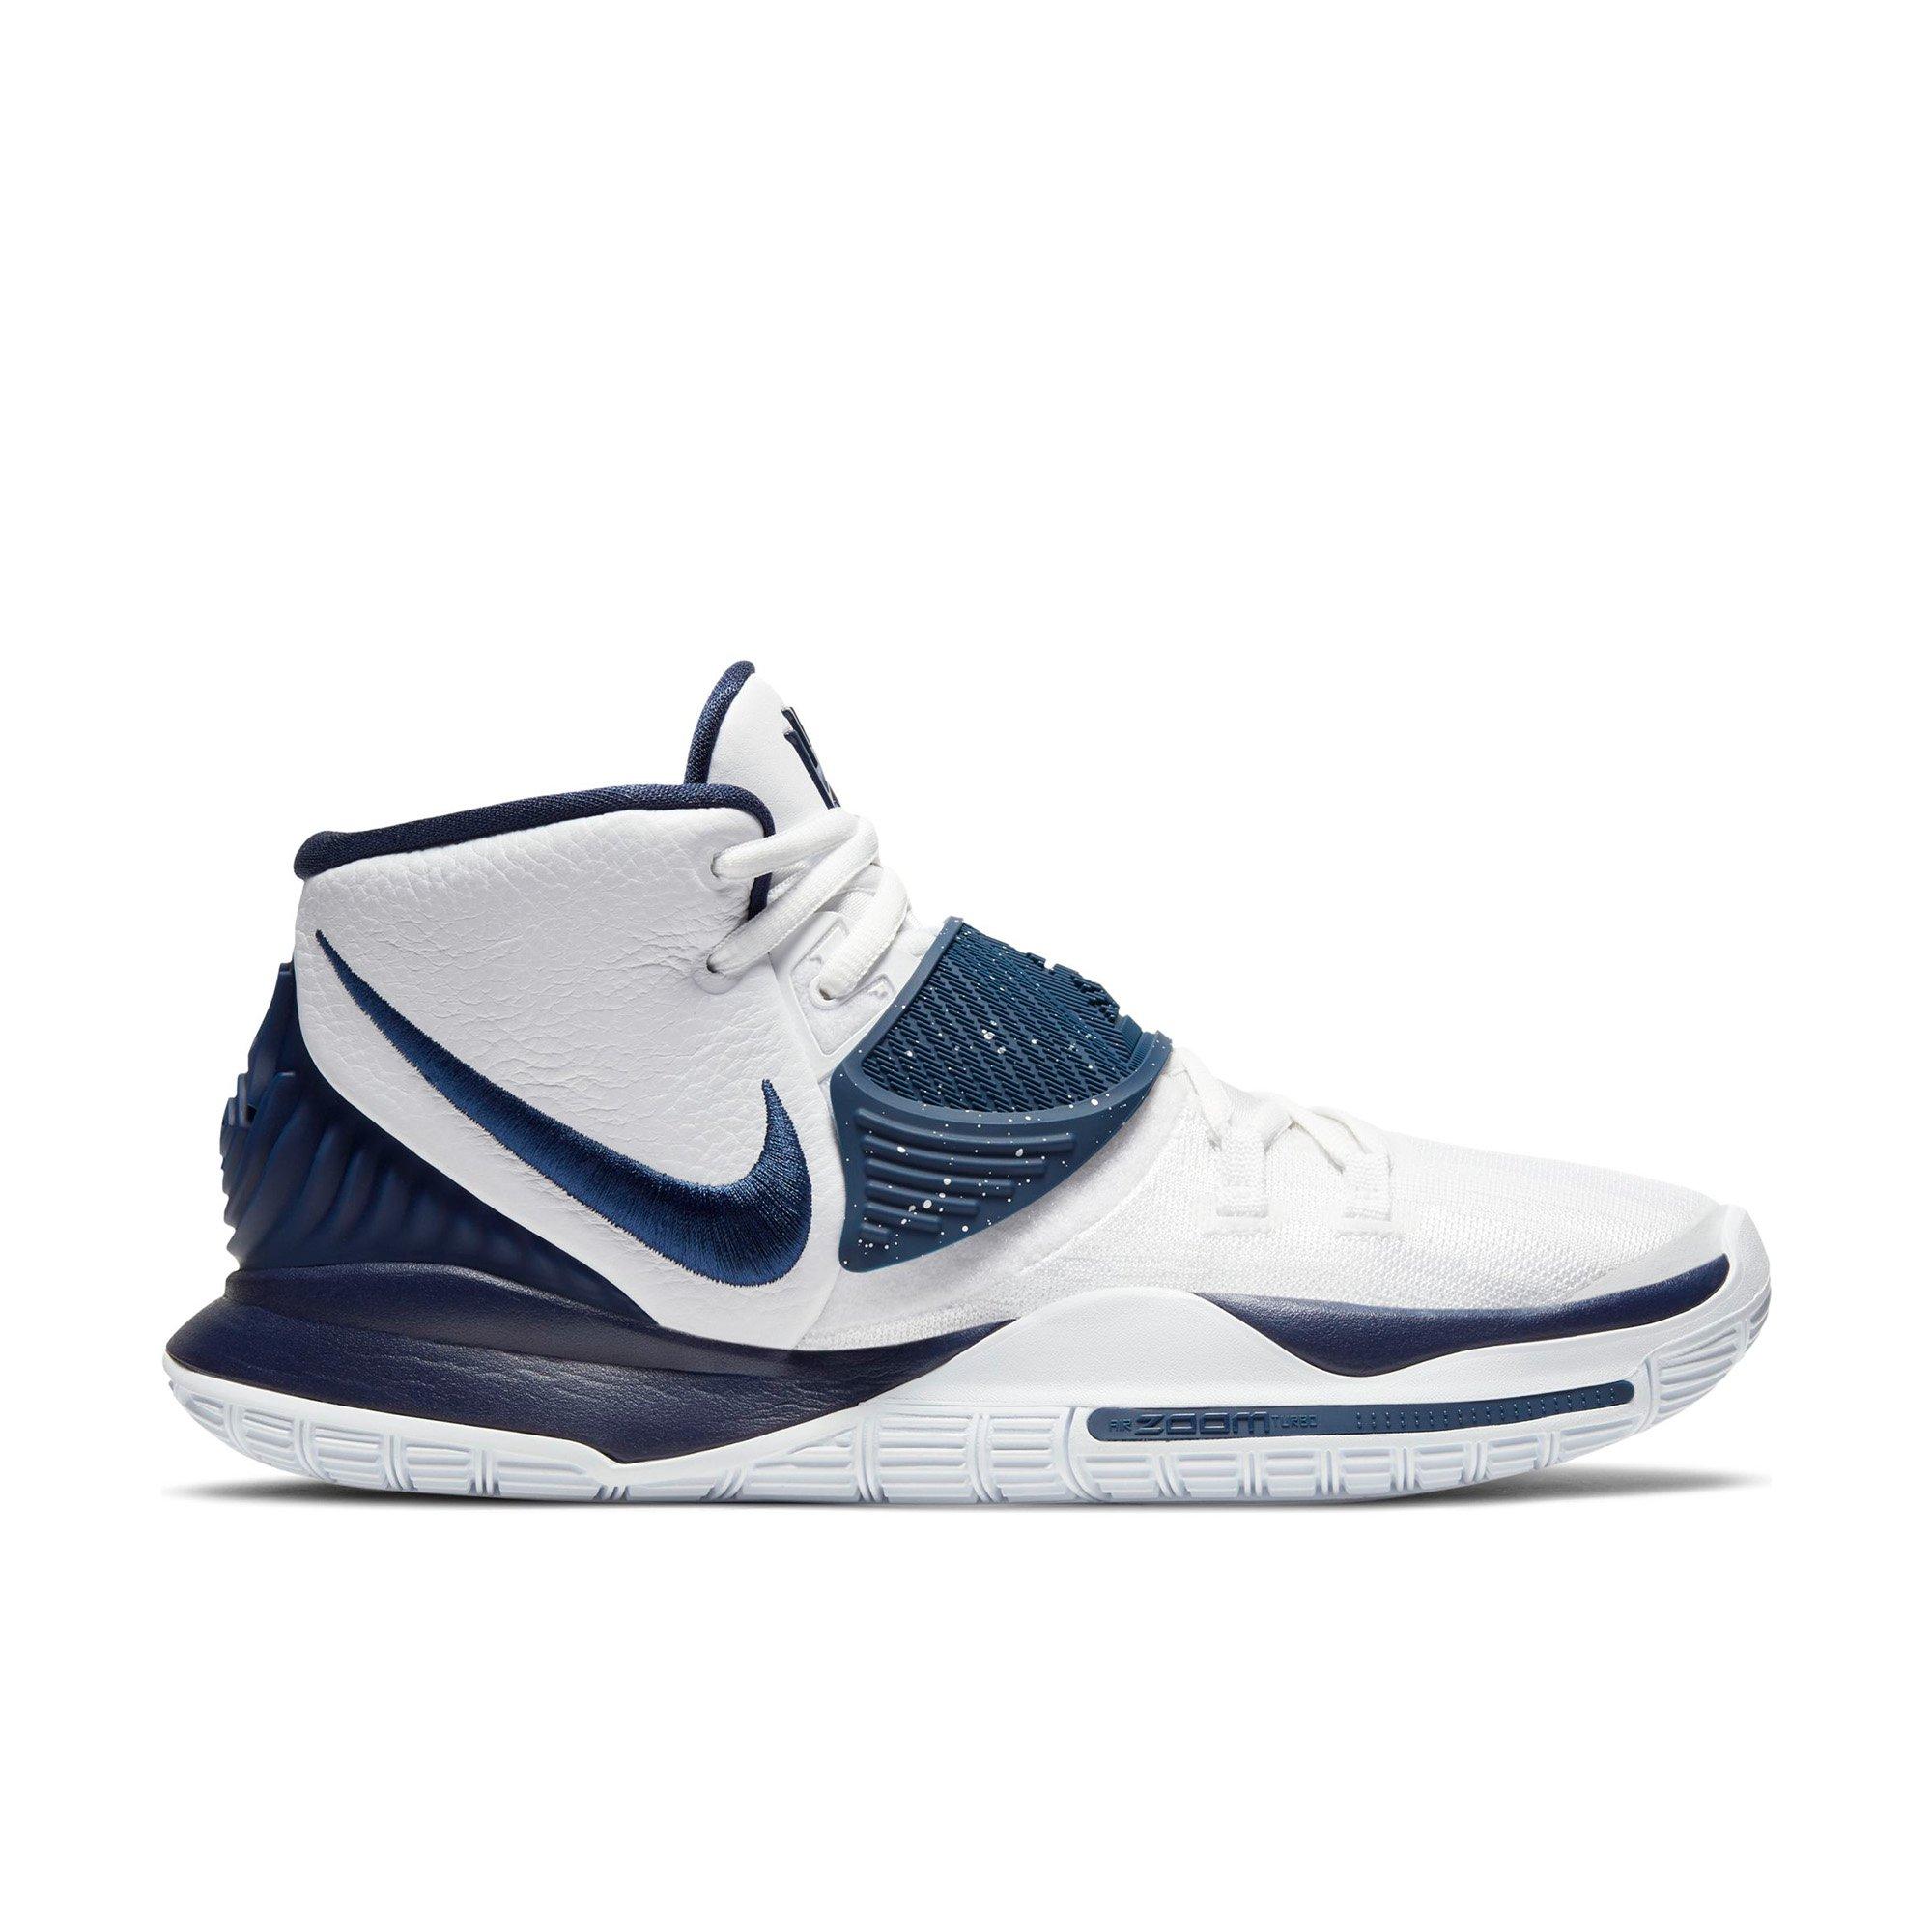 navy blue and white basketball shoes